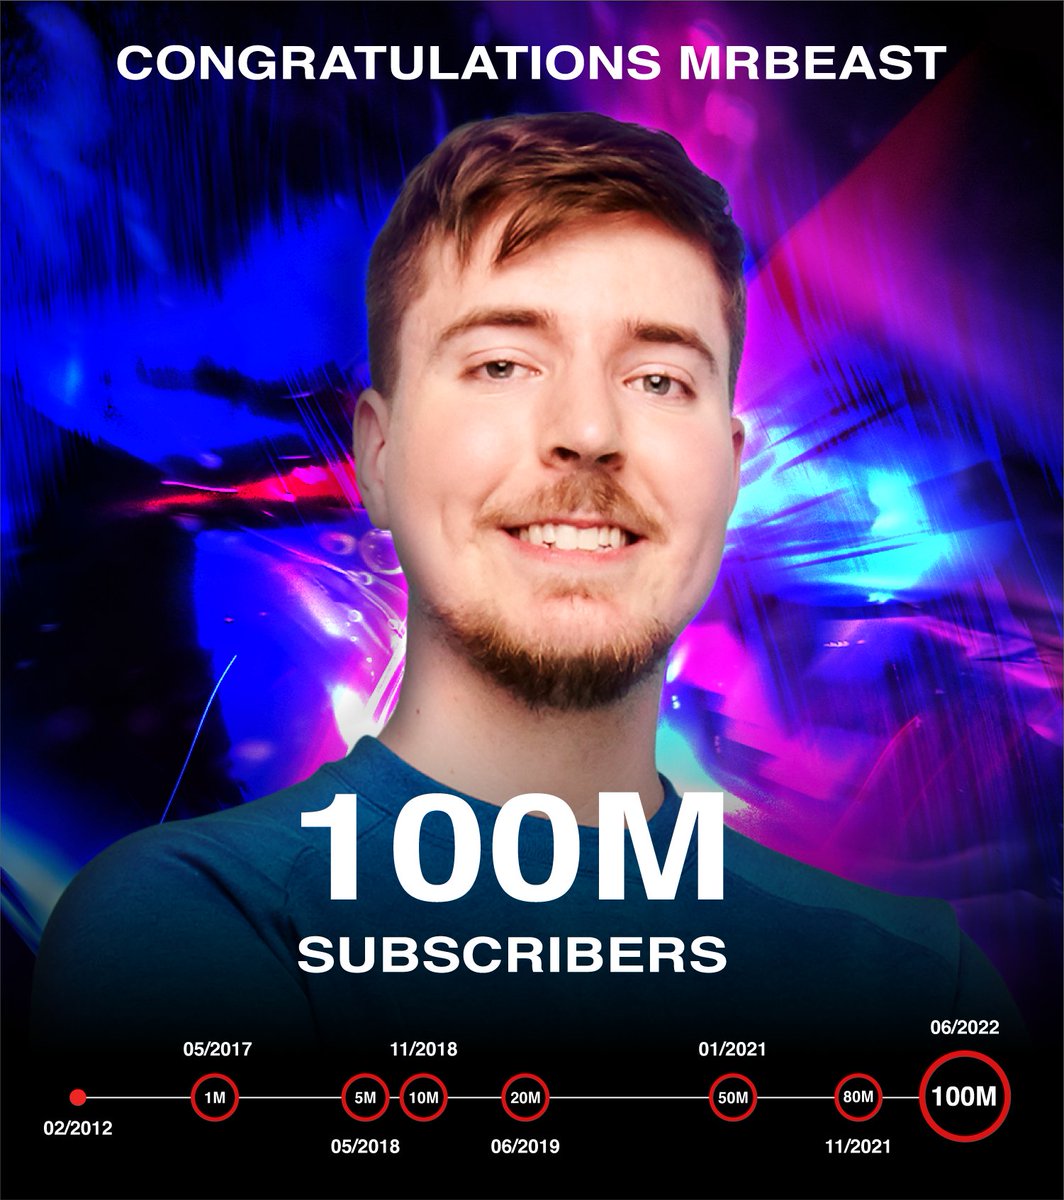 congrats to the King on 100M subs 👑